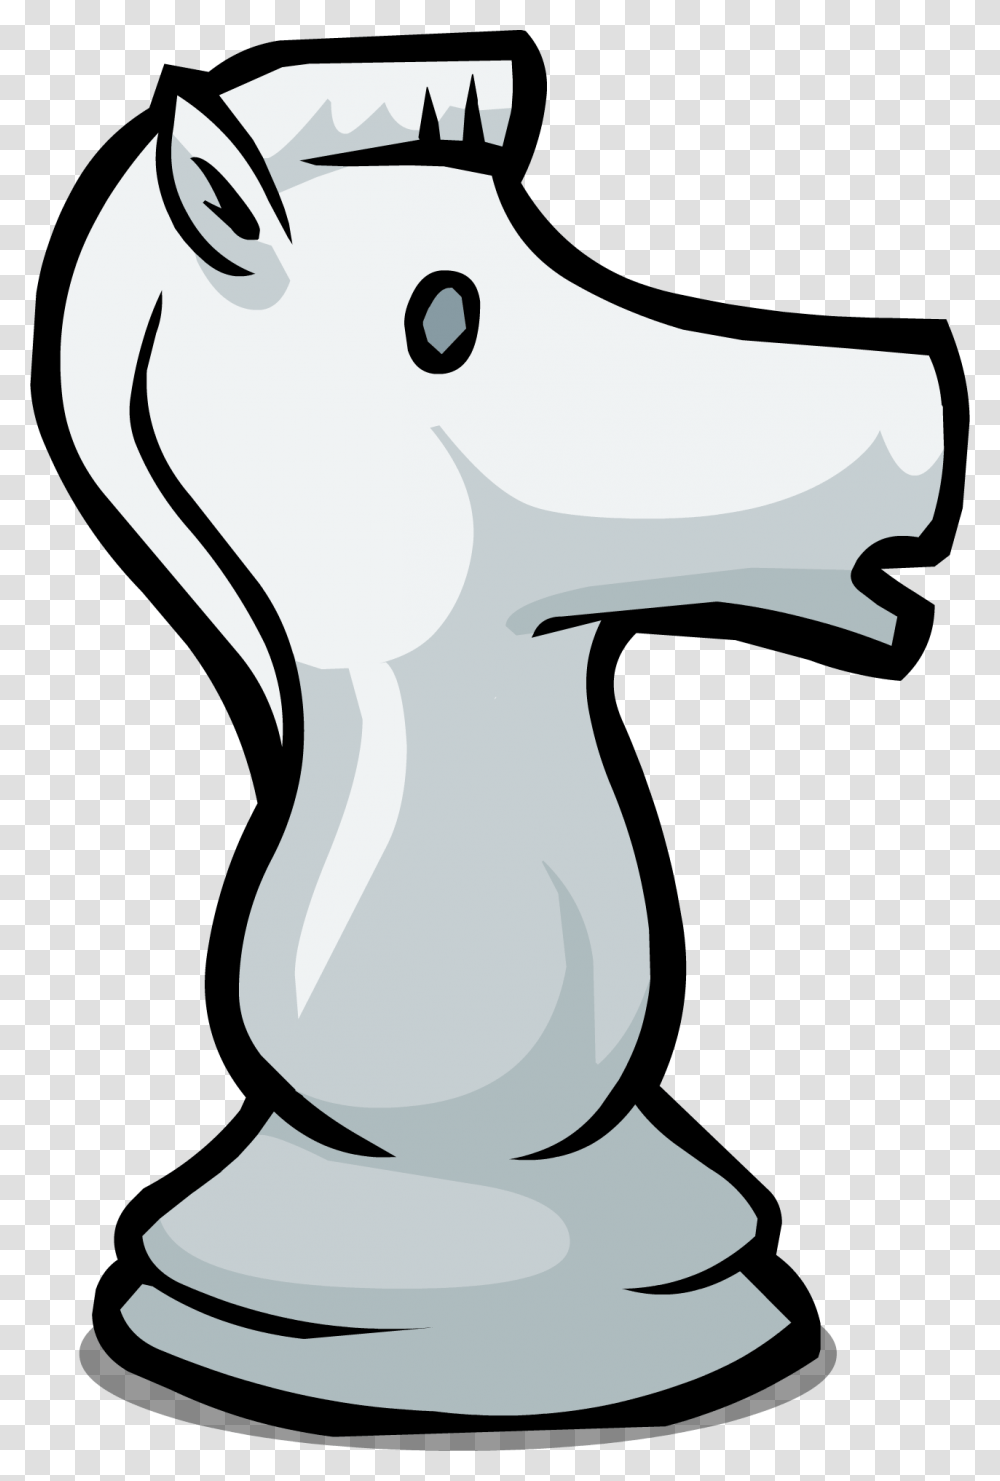 Chess Knight Club Penguin Wiki Fandom Powered By Wikia Chess Horse Cartoon Background, Cushion, Torso Transparent Png